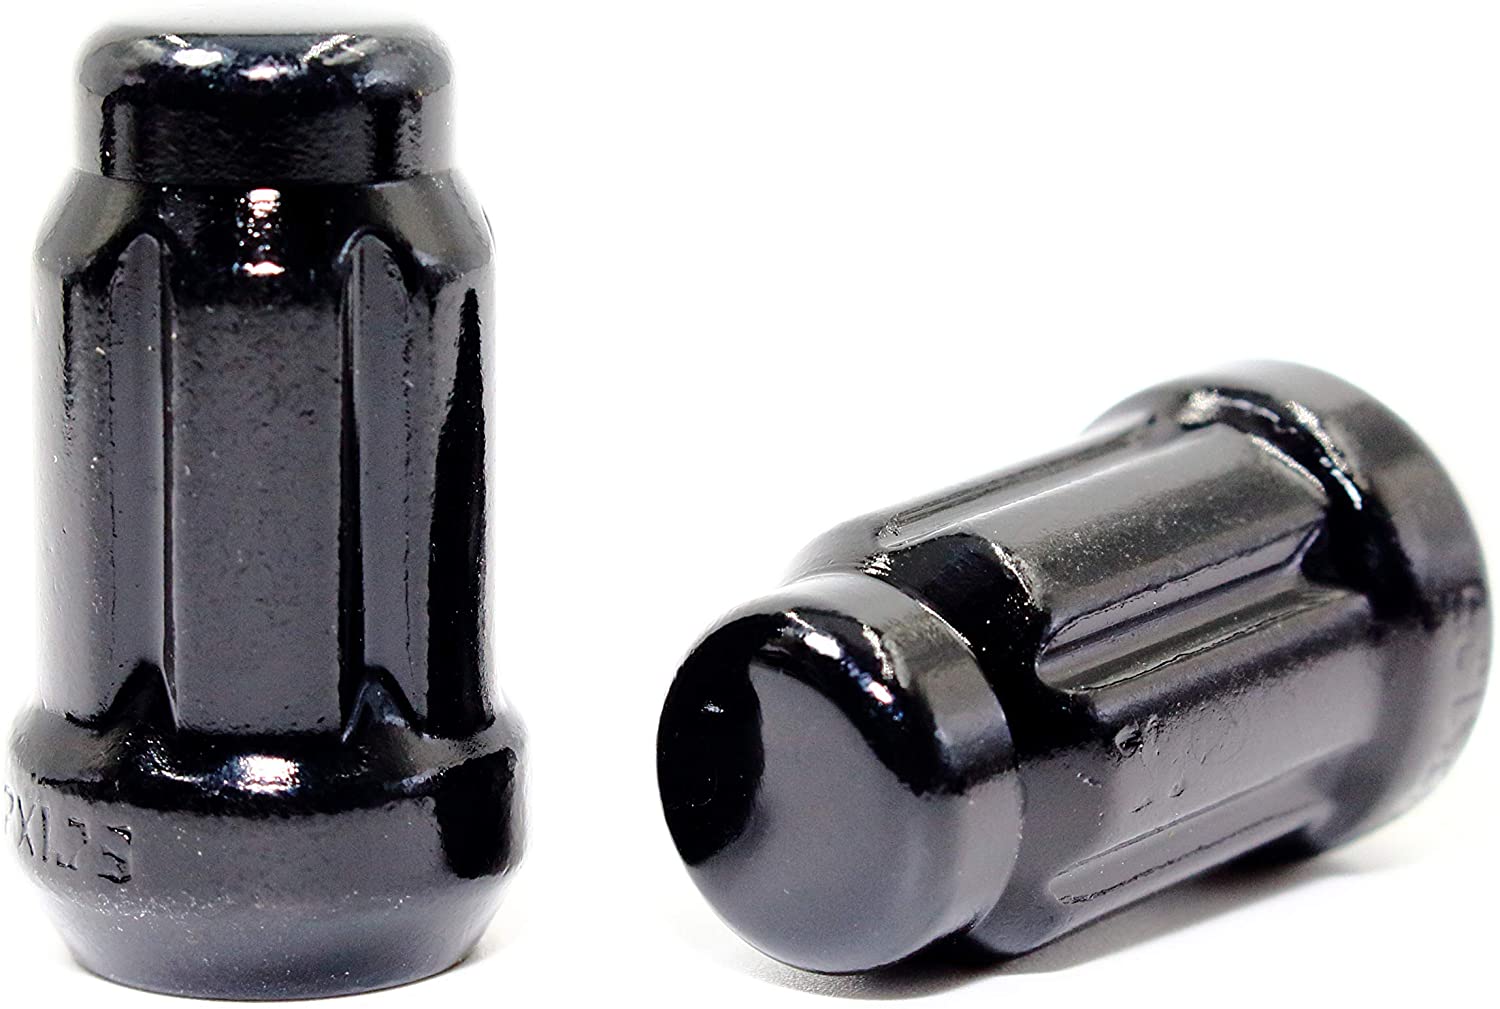 Includes 1 Socket Key Tool 1/2x20 Threads 20pcs Black Spline Drive Lug Nuts 1.4 inch Length Cone Acorn Taper Seat Compatible with Ford Lincoln Dodge Closed End 